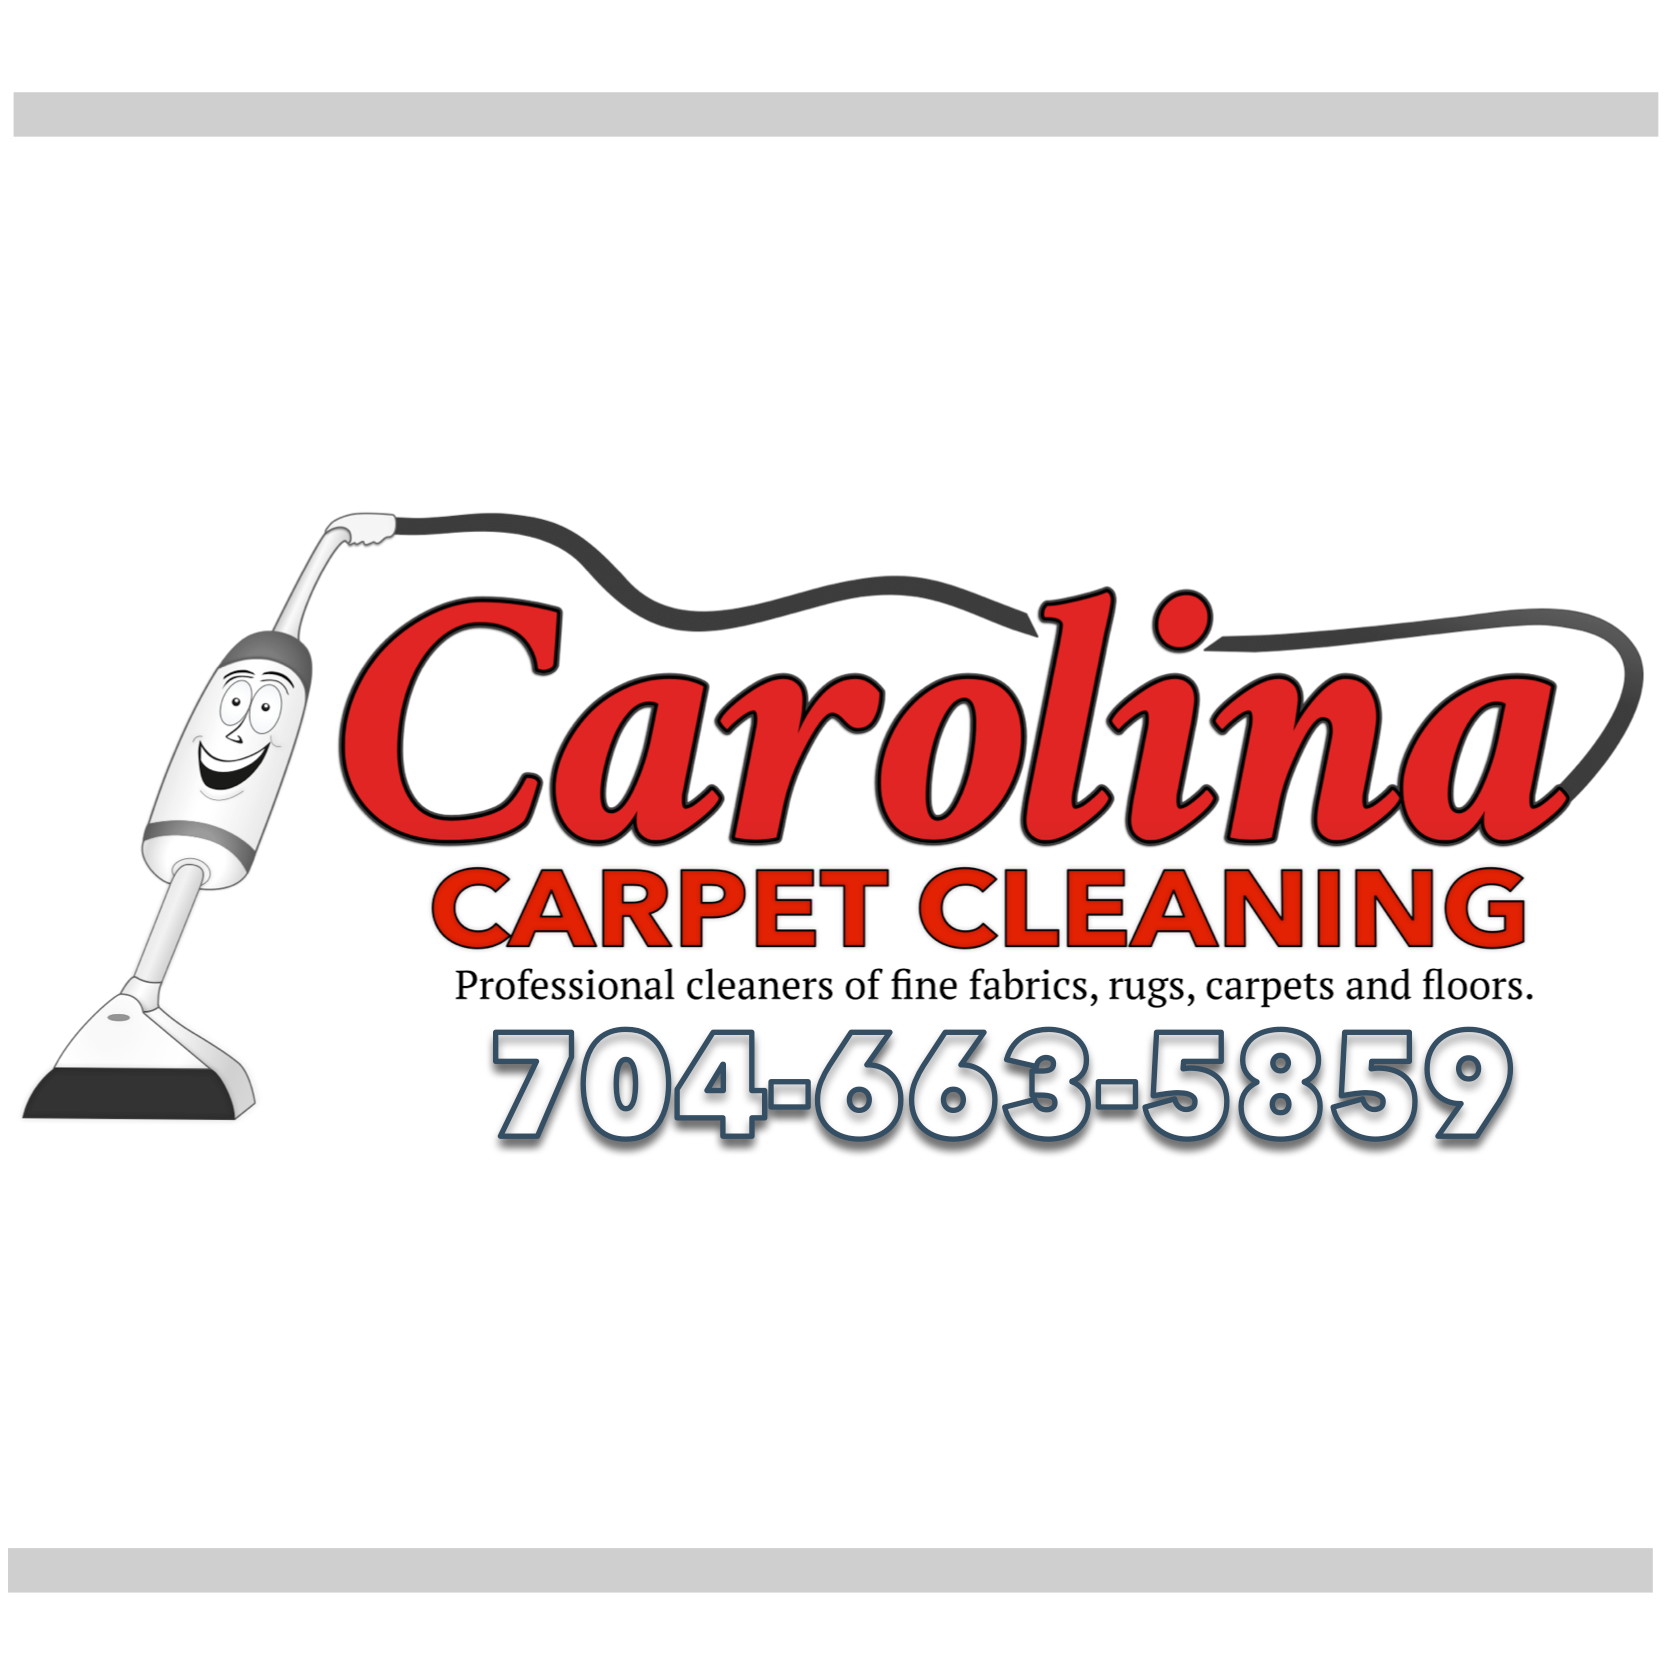 Professional cleaners of fine fabrics, rugs, carpets and floors.

Serving Charlotte, Lake Norman & Surrounding Areas!